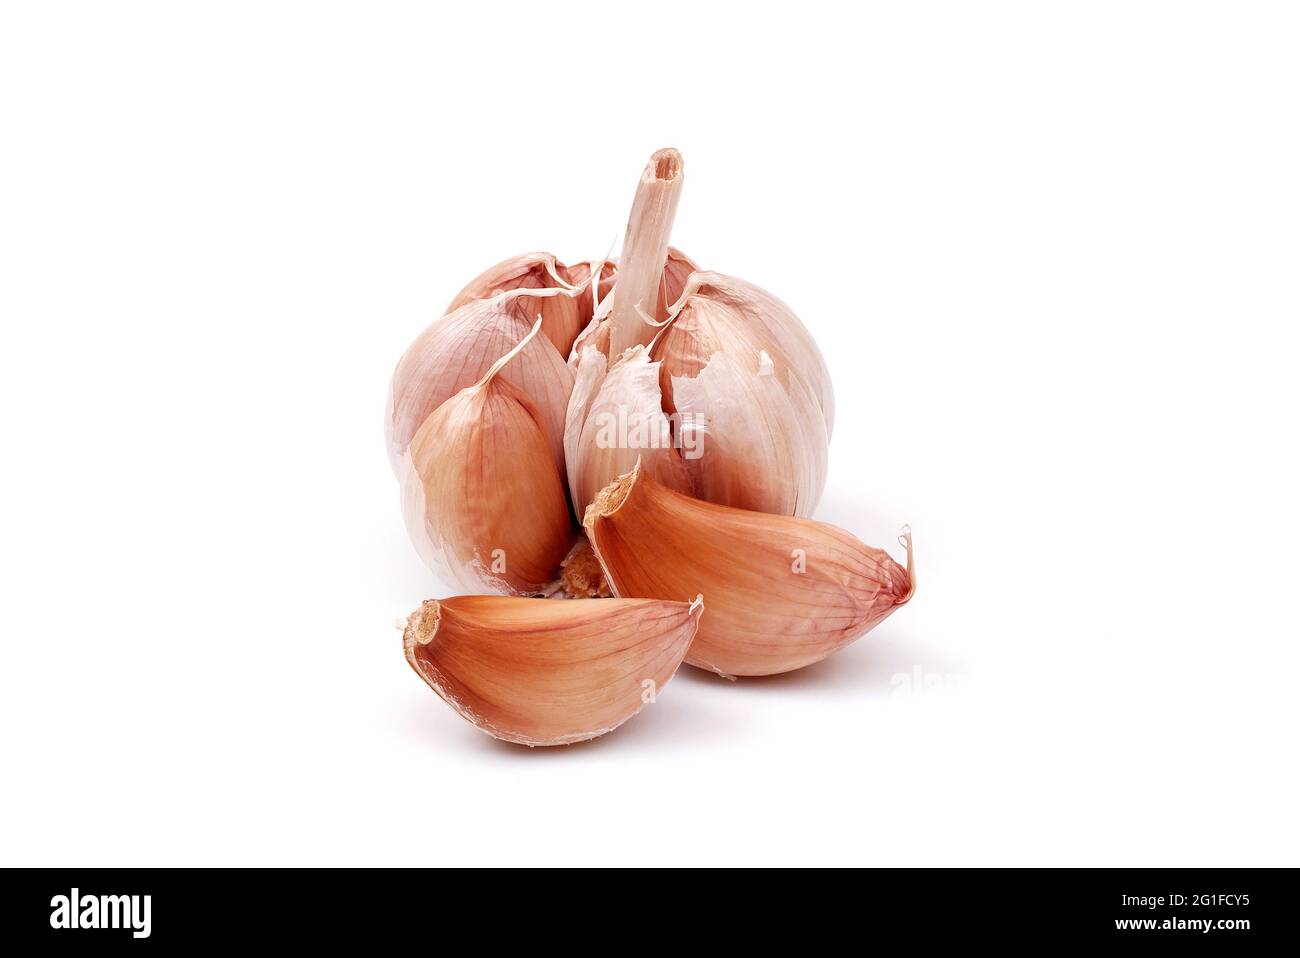 garlic bulb and cloves isolated on white background, full depth of field Stock Photo